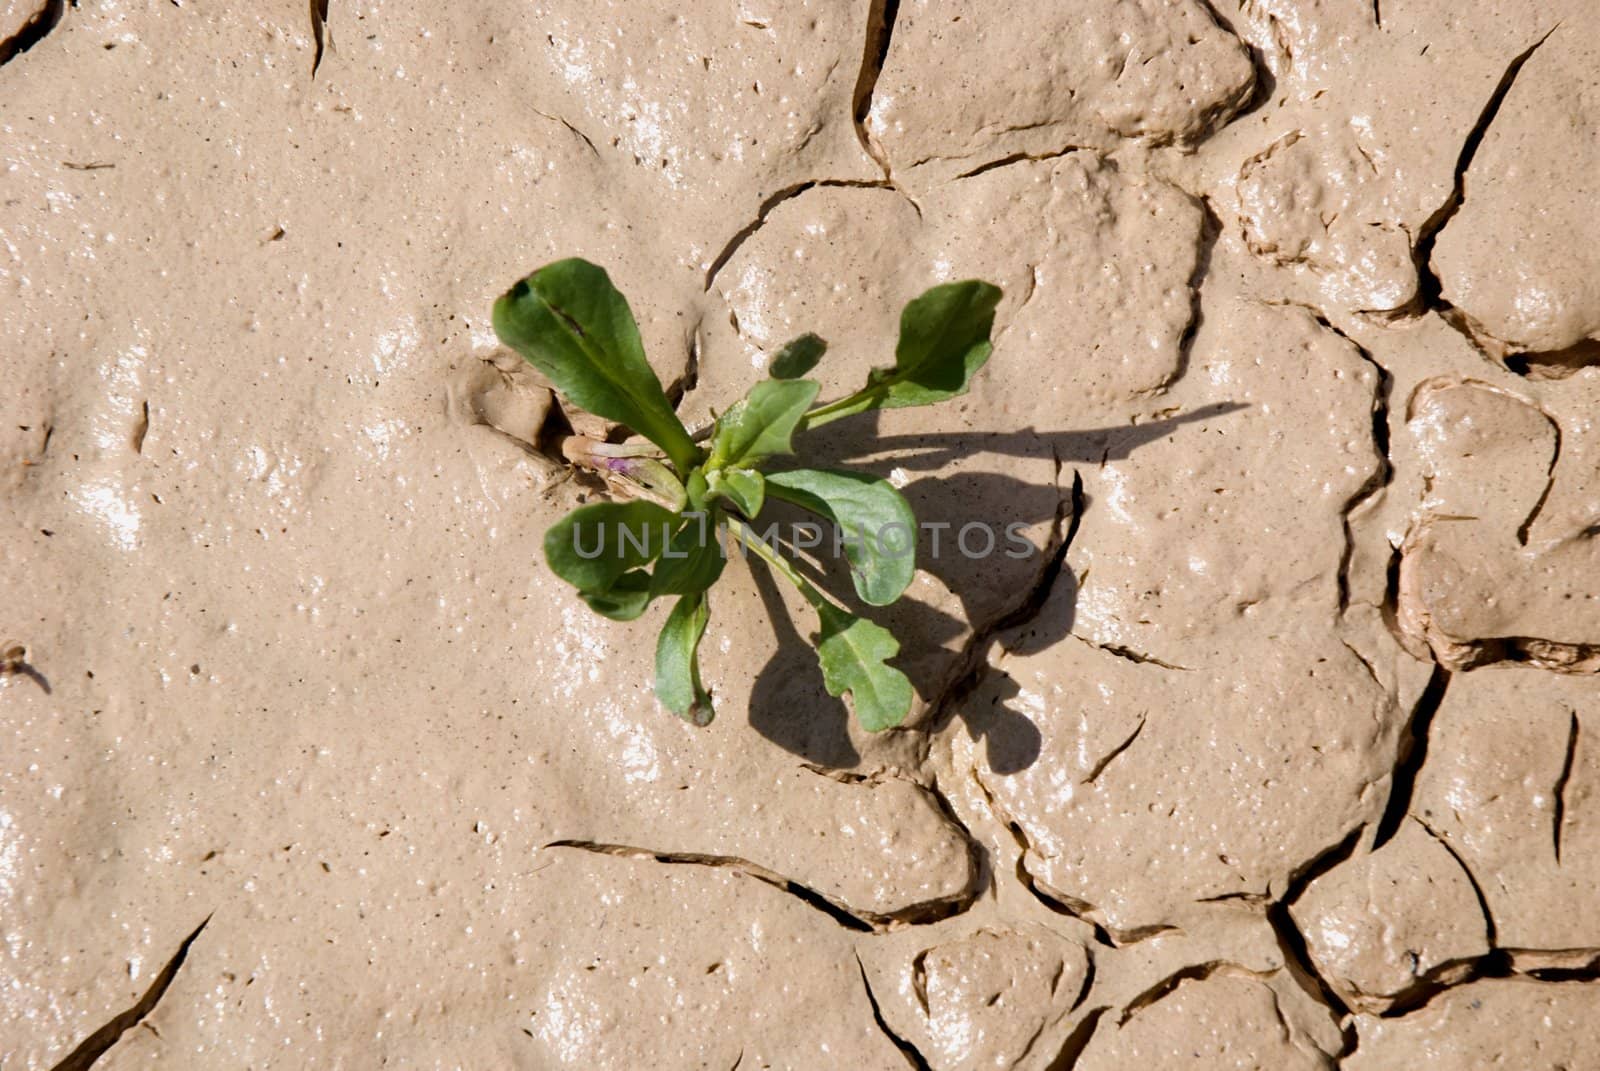 Small plant growing in a drought desert